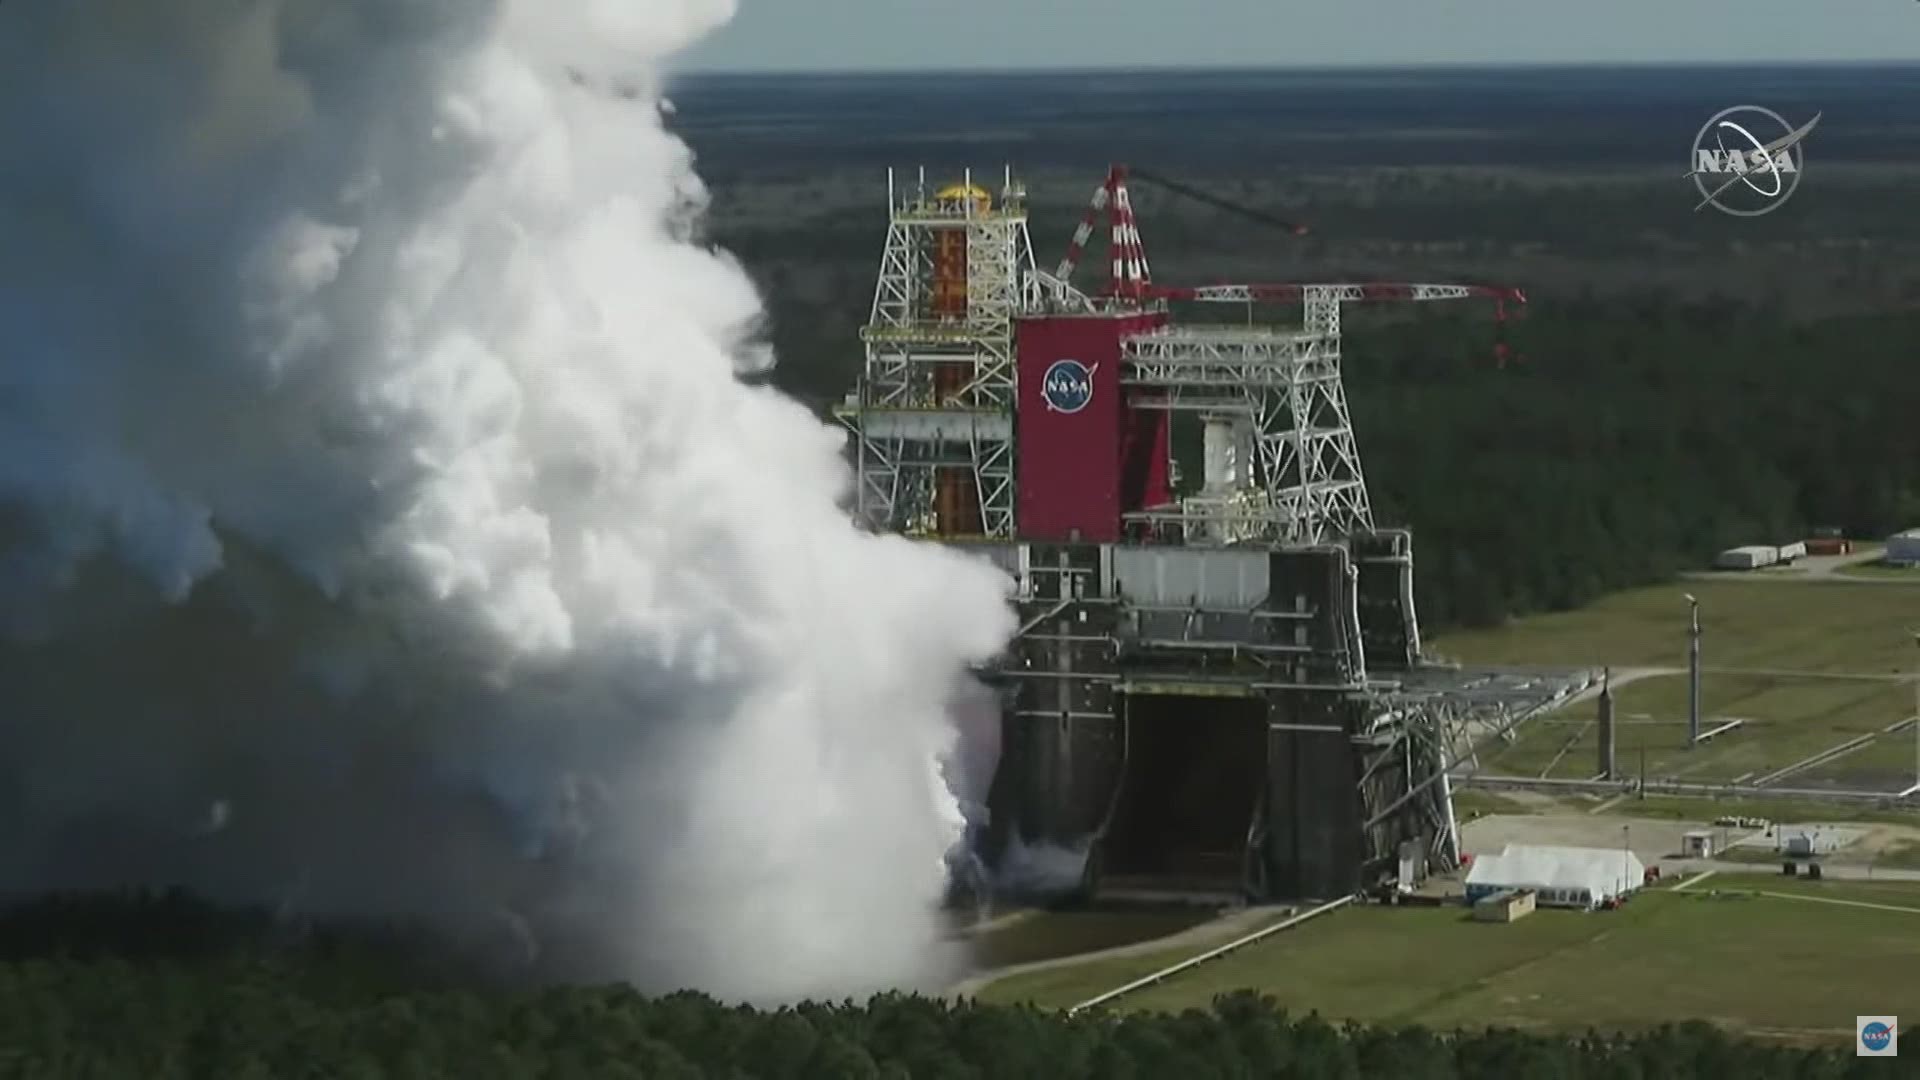 Hot fire test of the core stage for the Space Launch System rocket at NASA’s Stennis Space Center near Bay St. Louis, Mississippi.